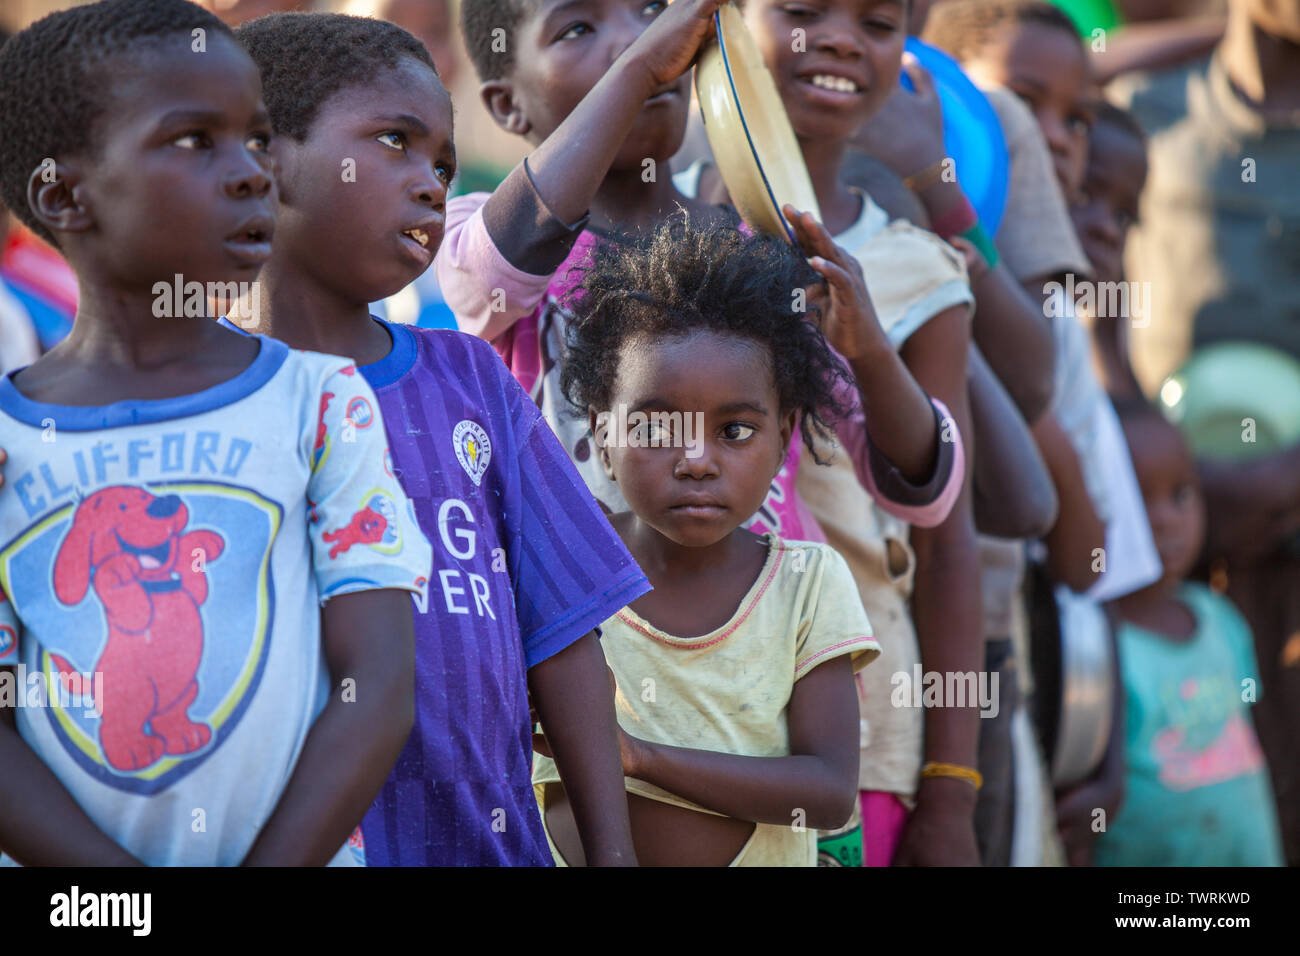 A hungry child waits in line to get food on a hot day Stock Photo